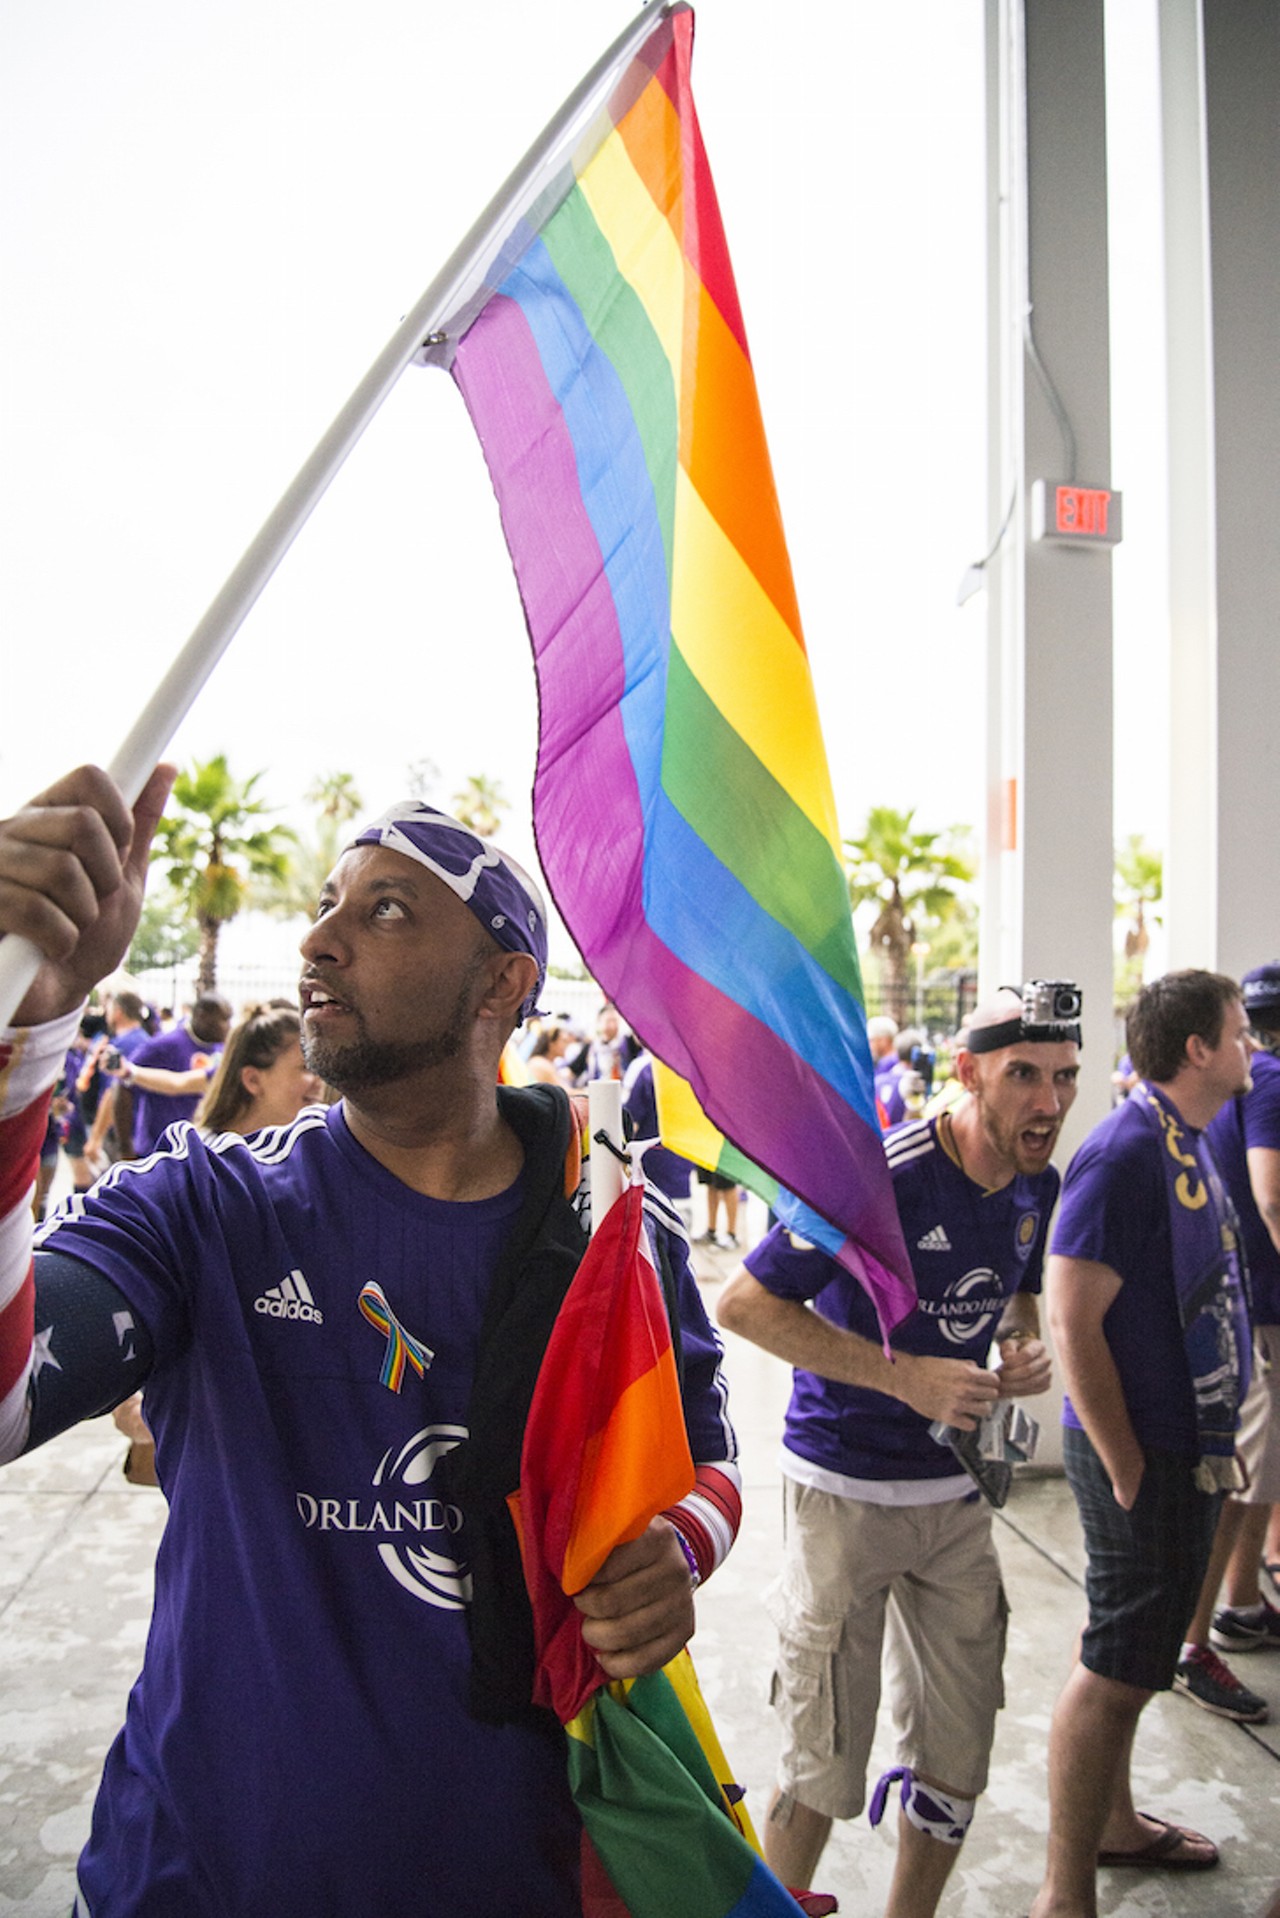 Photos from Orlando City's 2-2 draw with the San Jose Earthquakes